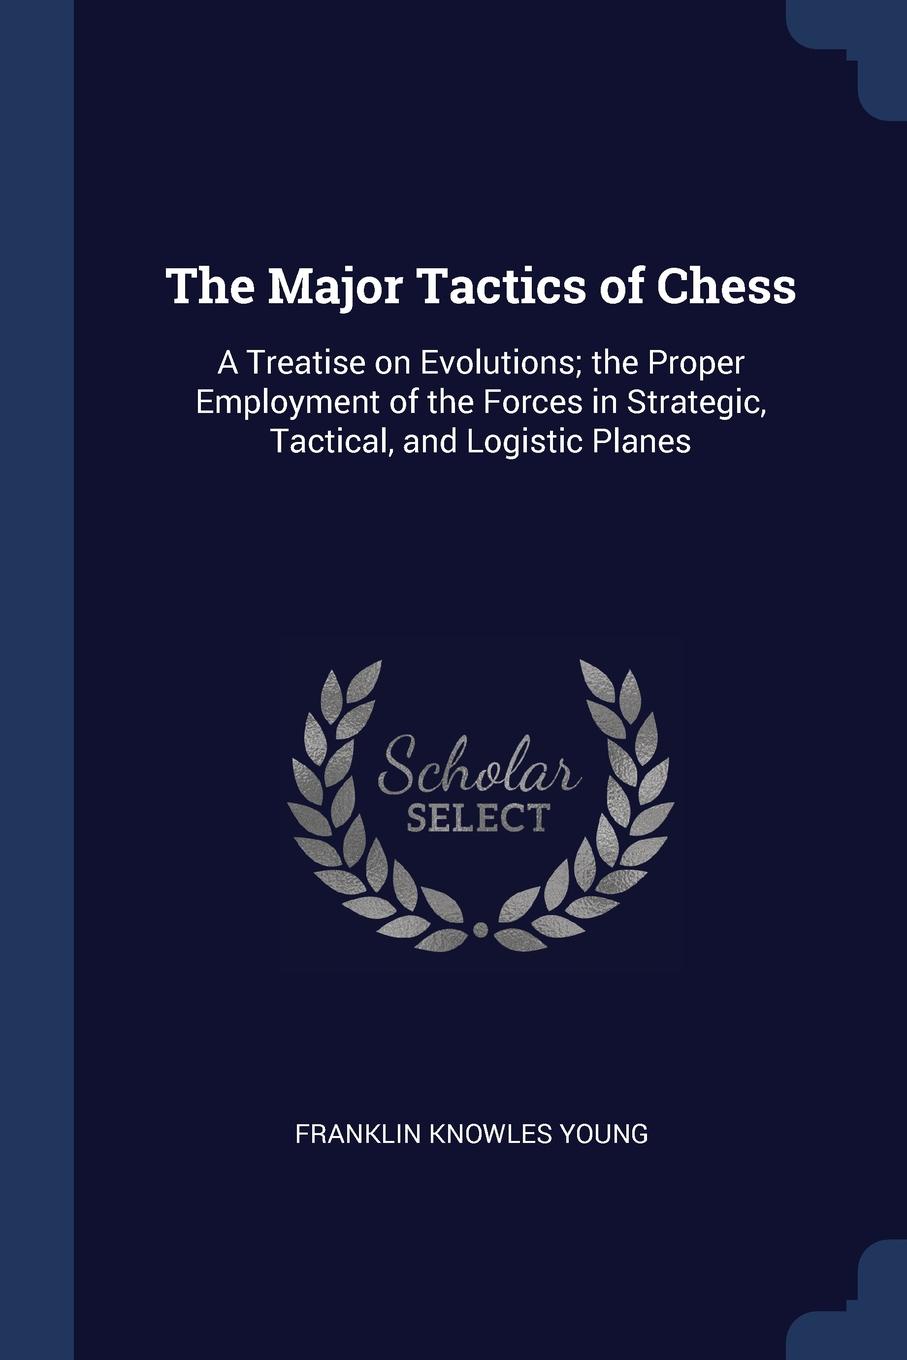 The Major Tactics of Chess. A Treatise on Evolutions; the Proper Employment of the Forces in Strategic, Tactical, and Logistic Planes